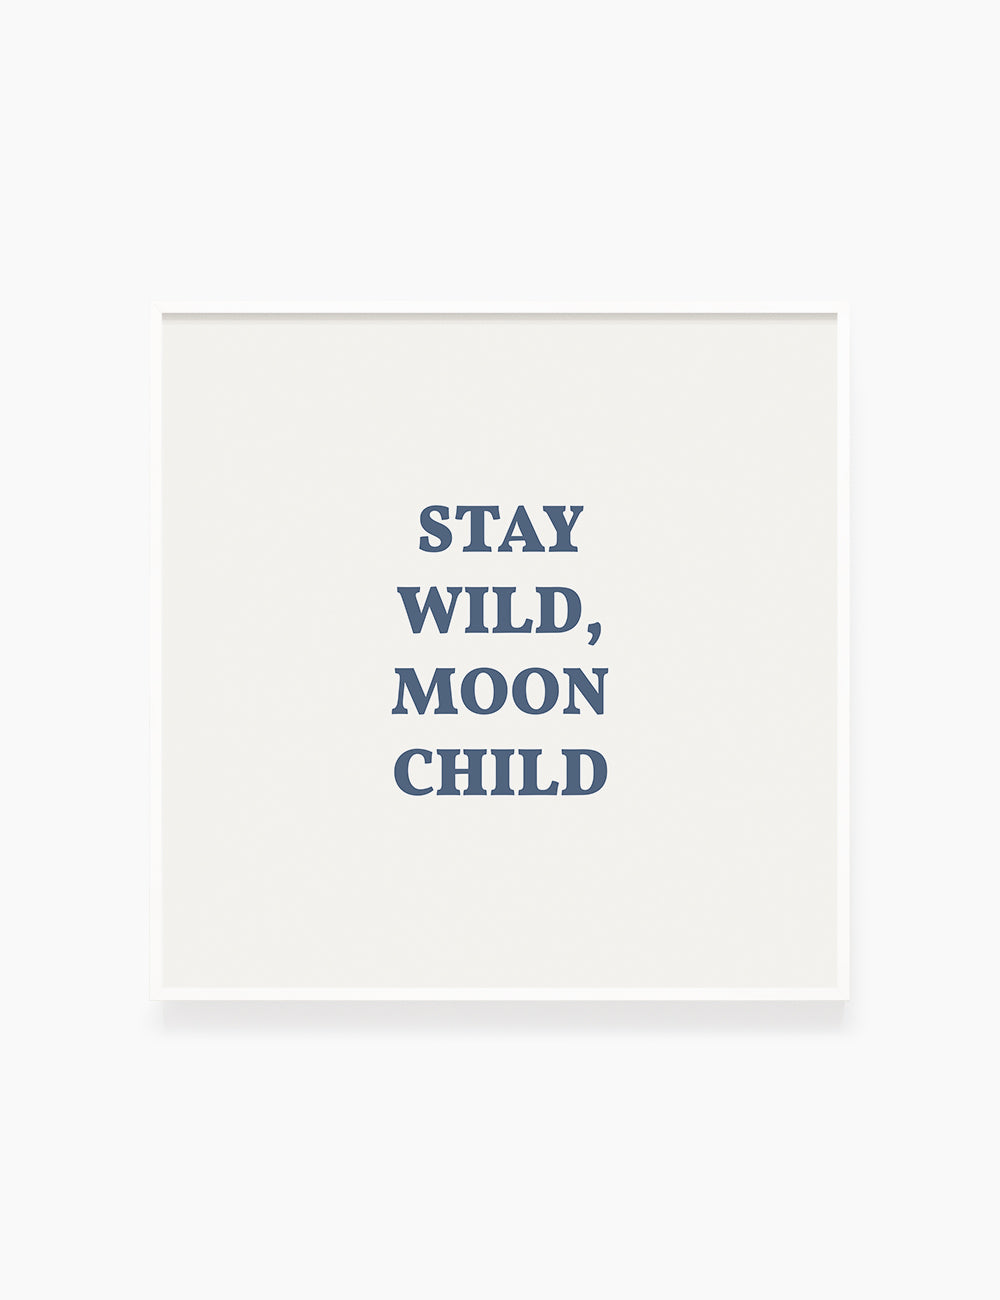 STAY WILD, MOON CHILD. Moonchild Quote. Blue. Printable Wall Art Quote. - PAPER MOON Art & Design